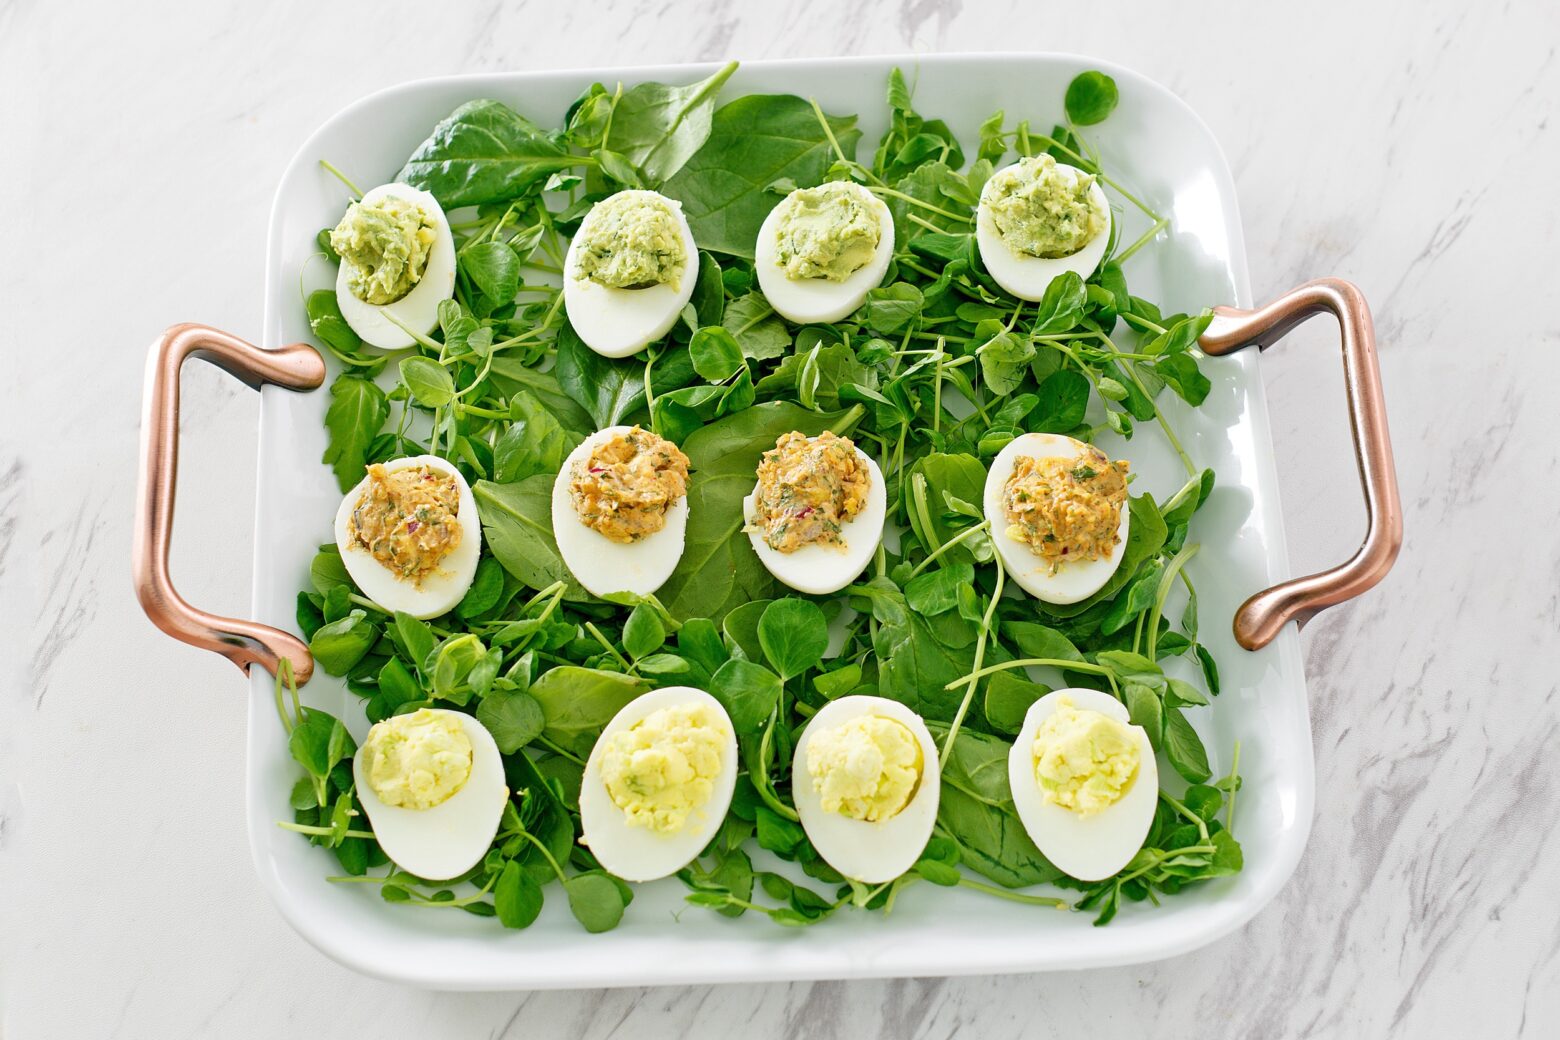 Three versions of deviled eggs arranged on a bed of greens.